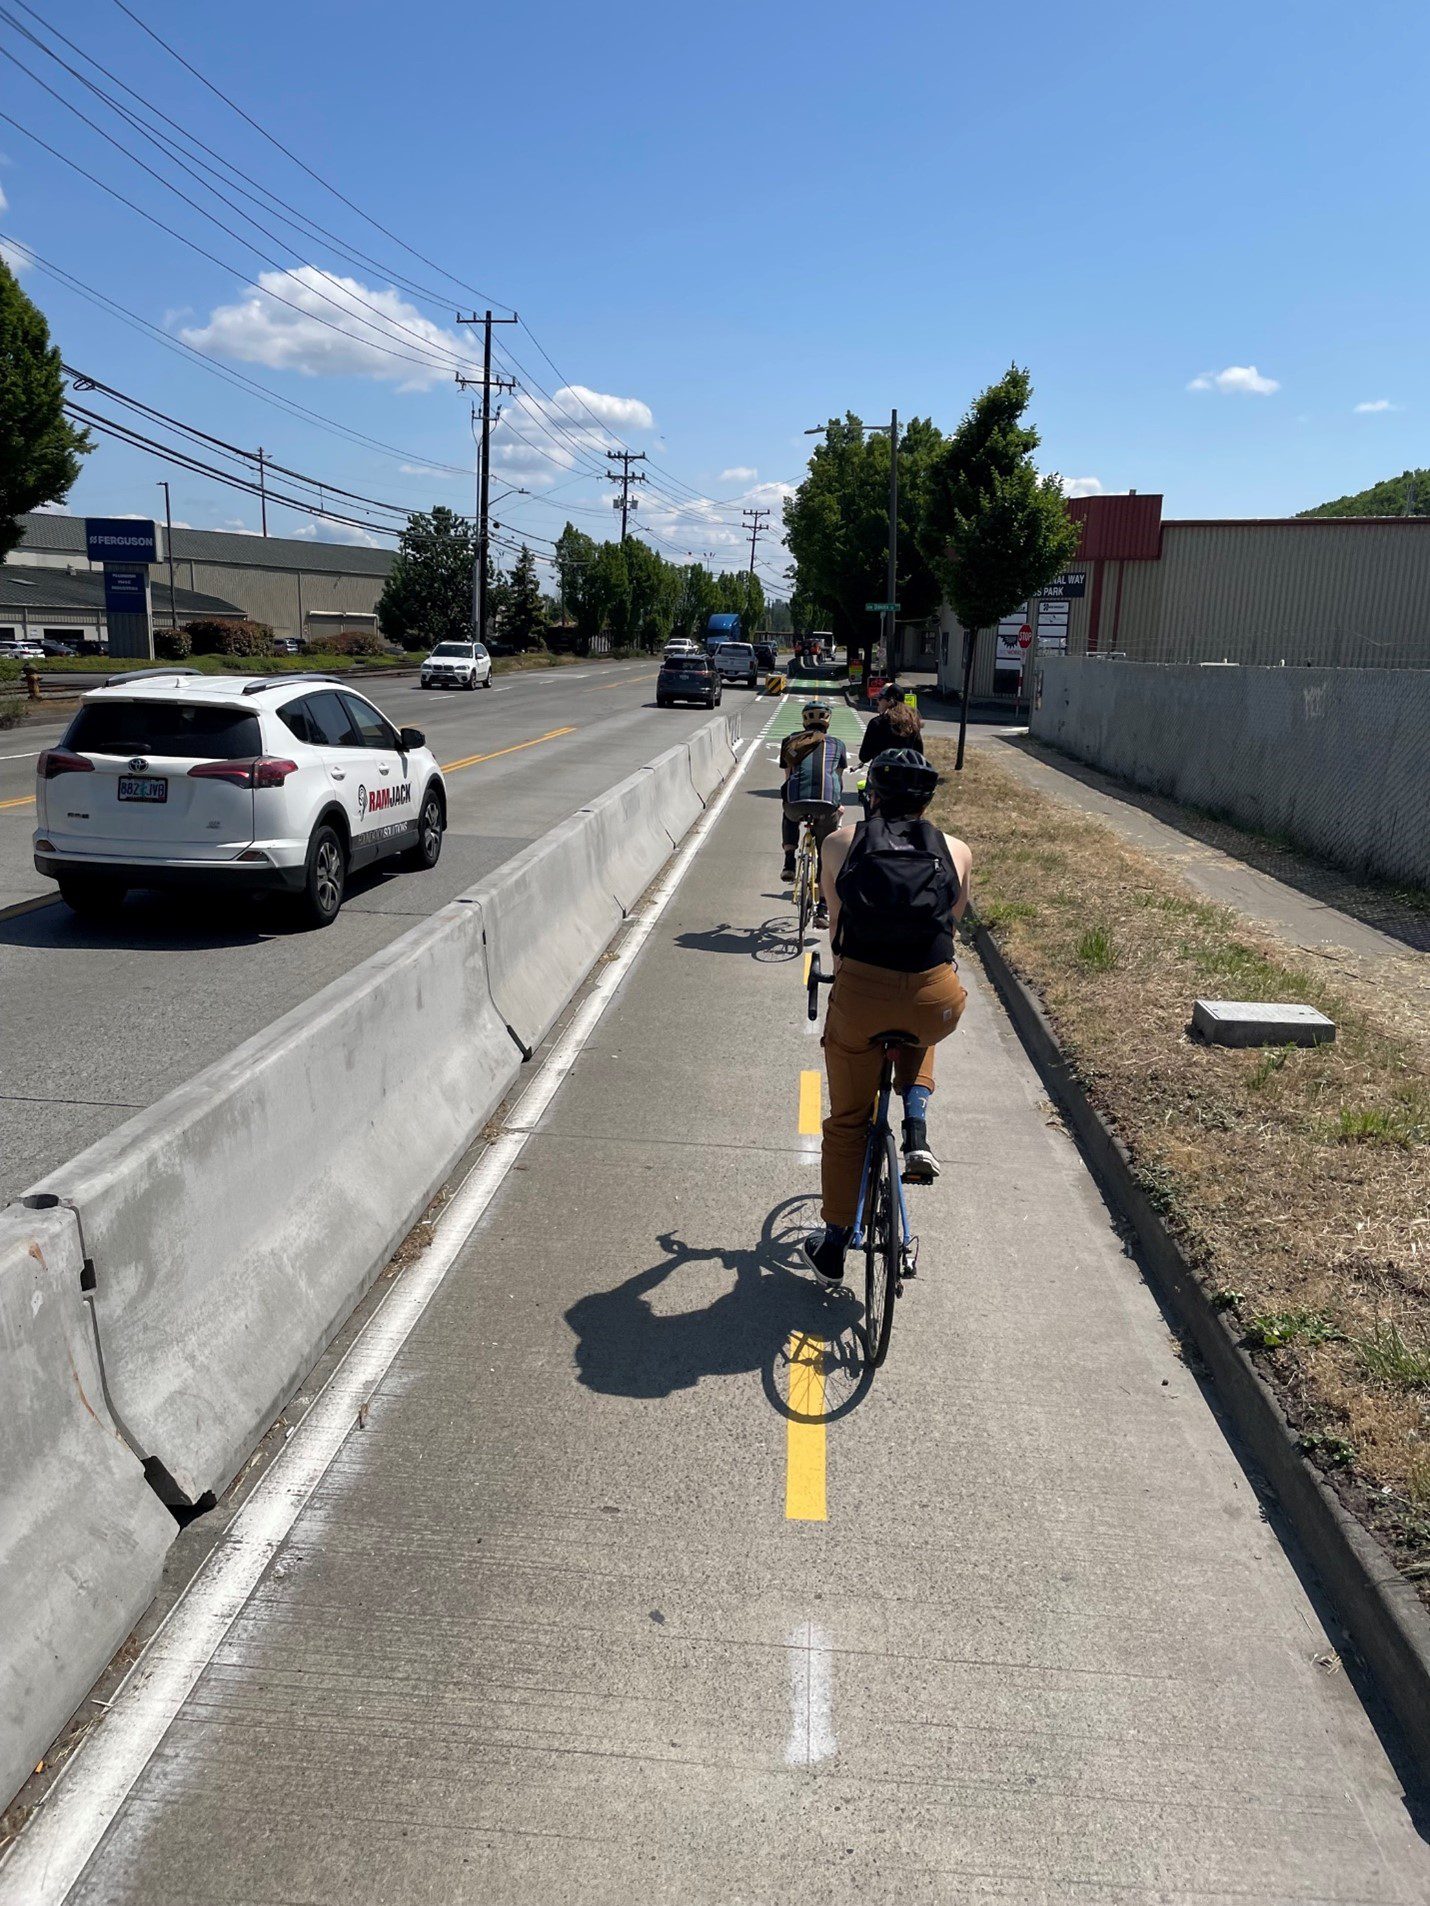 Several people bicycle in the protected bike lane along West Marginal Way SW. Cars travel in the street travel lanes to the left.